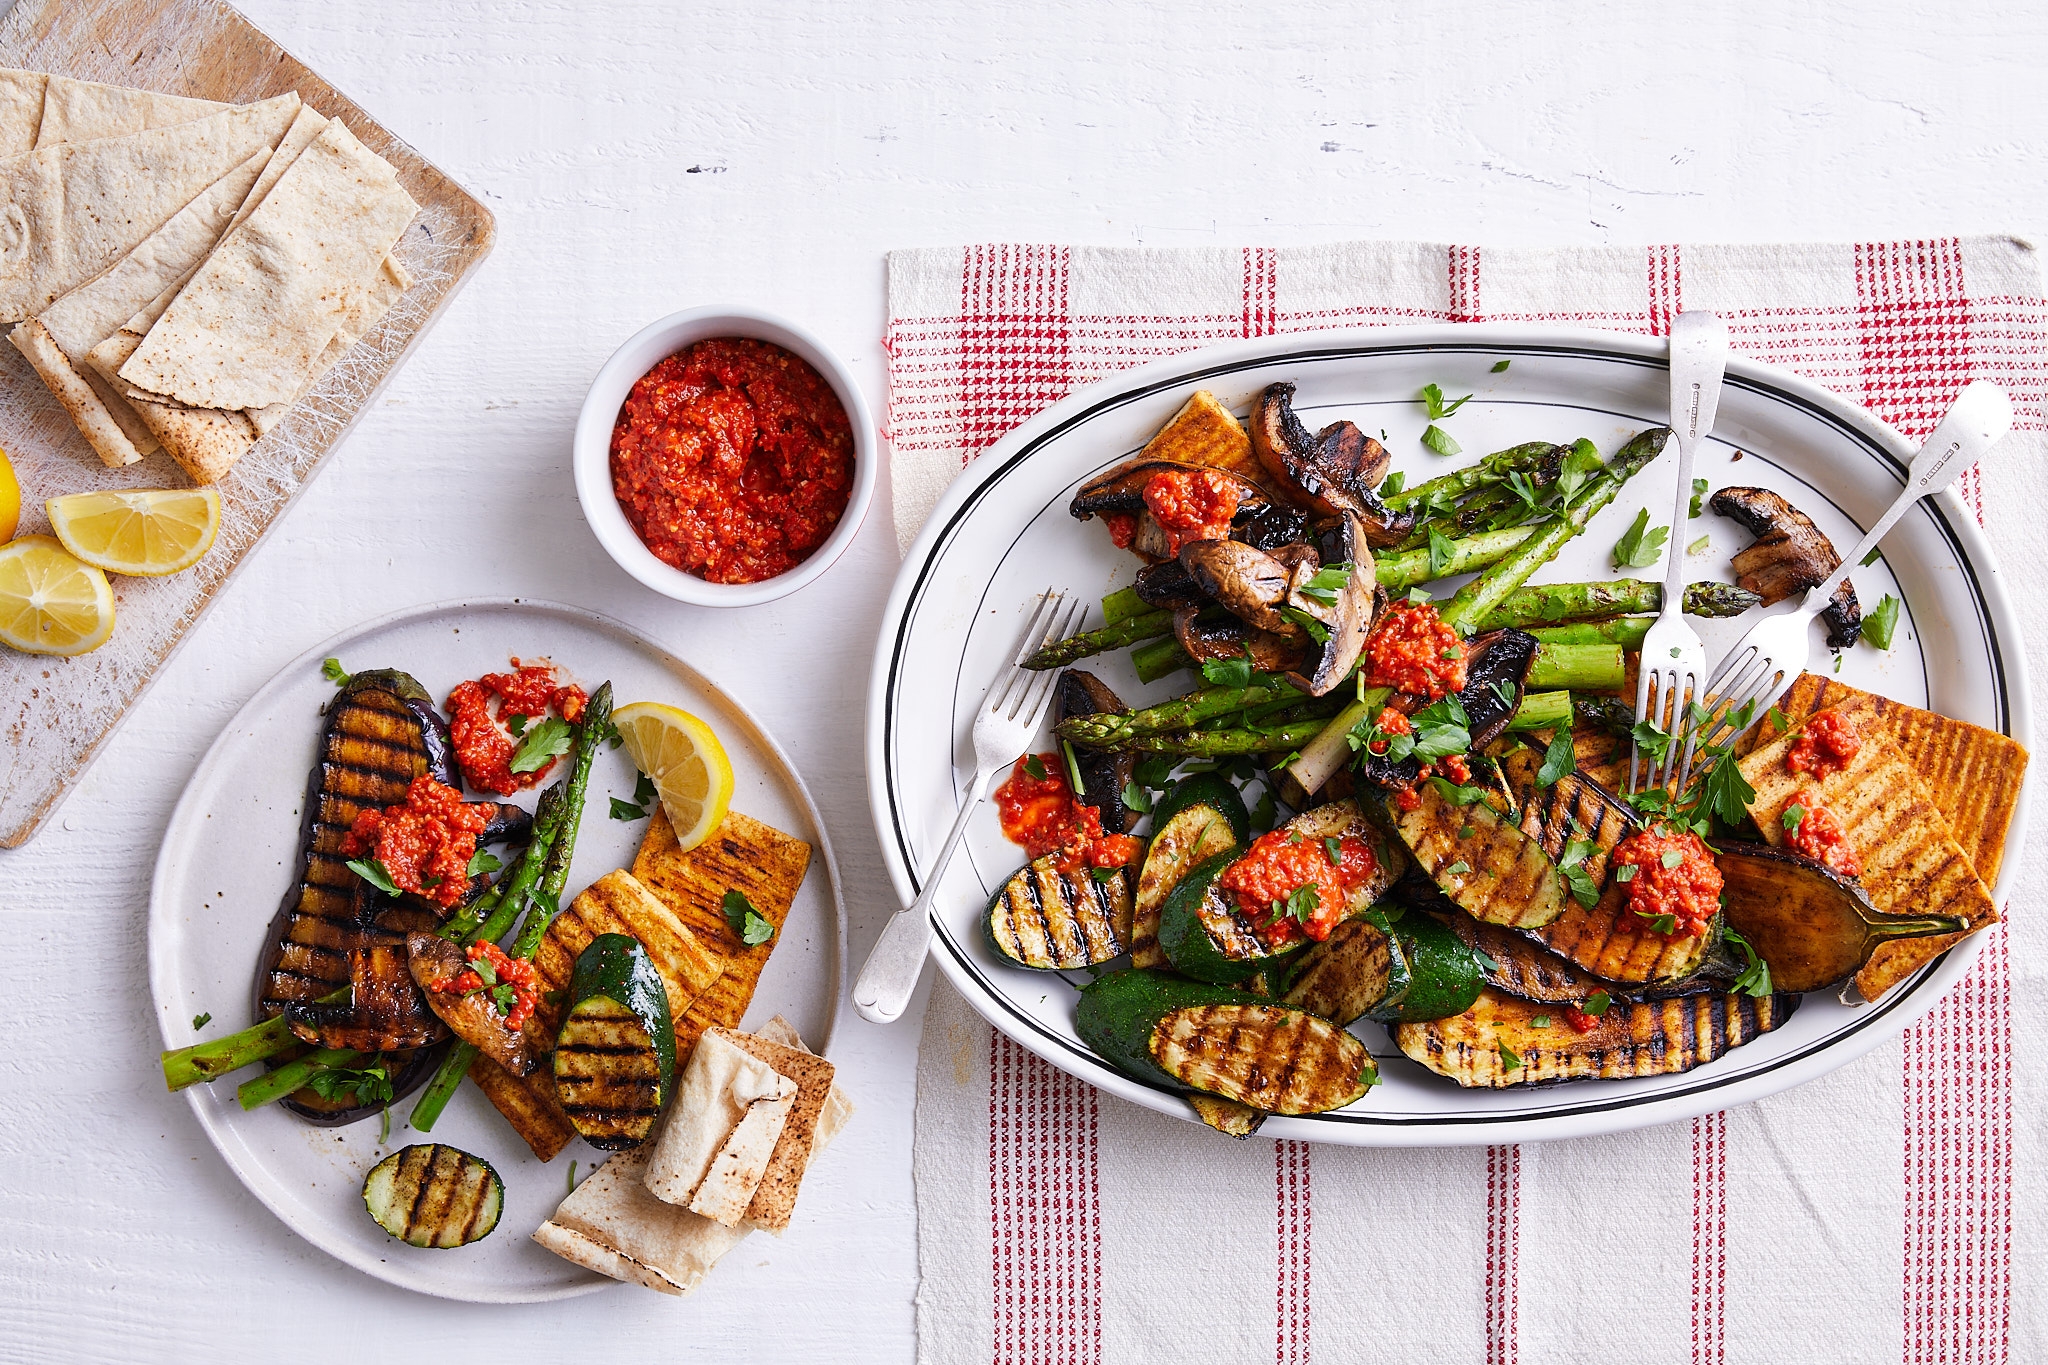 Grilled vegetables and bread arranged on a table